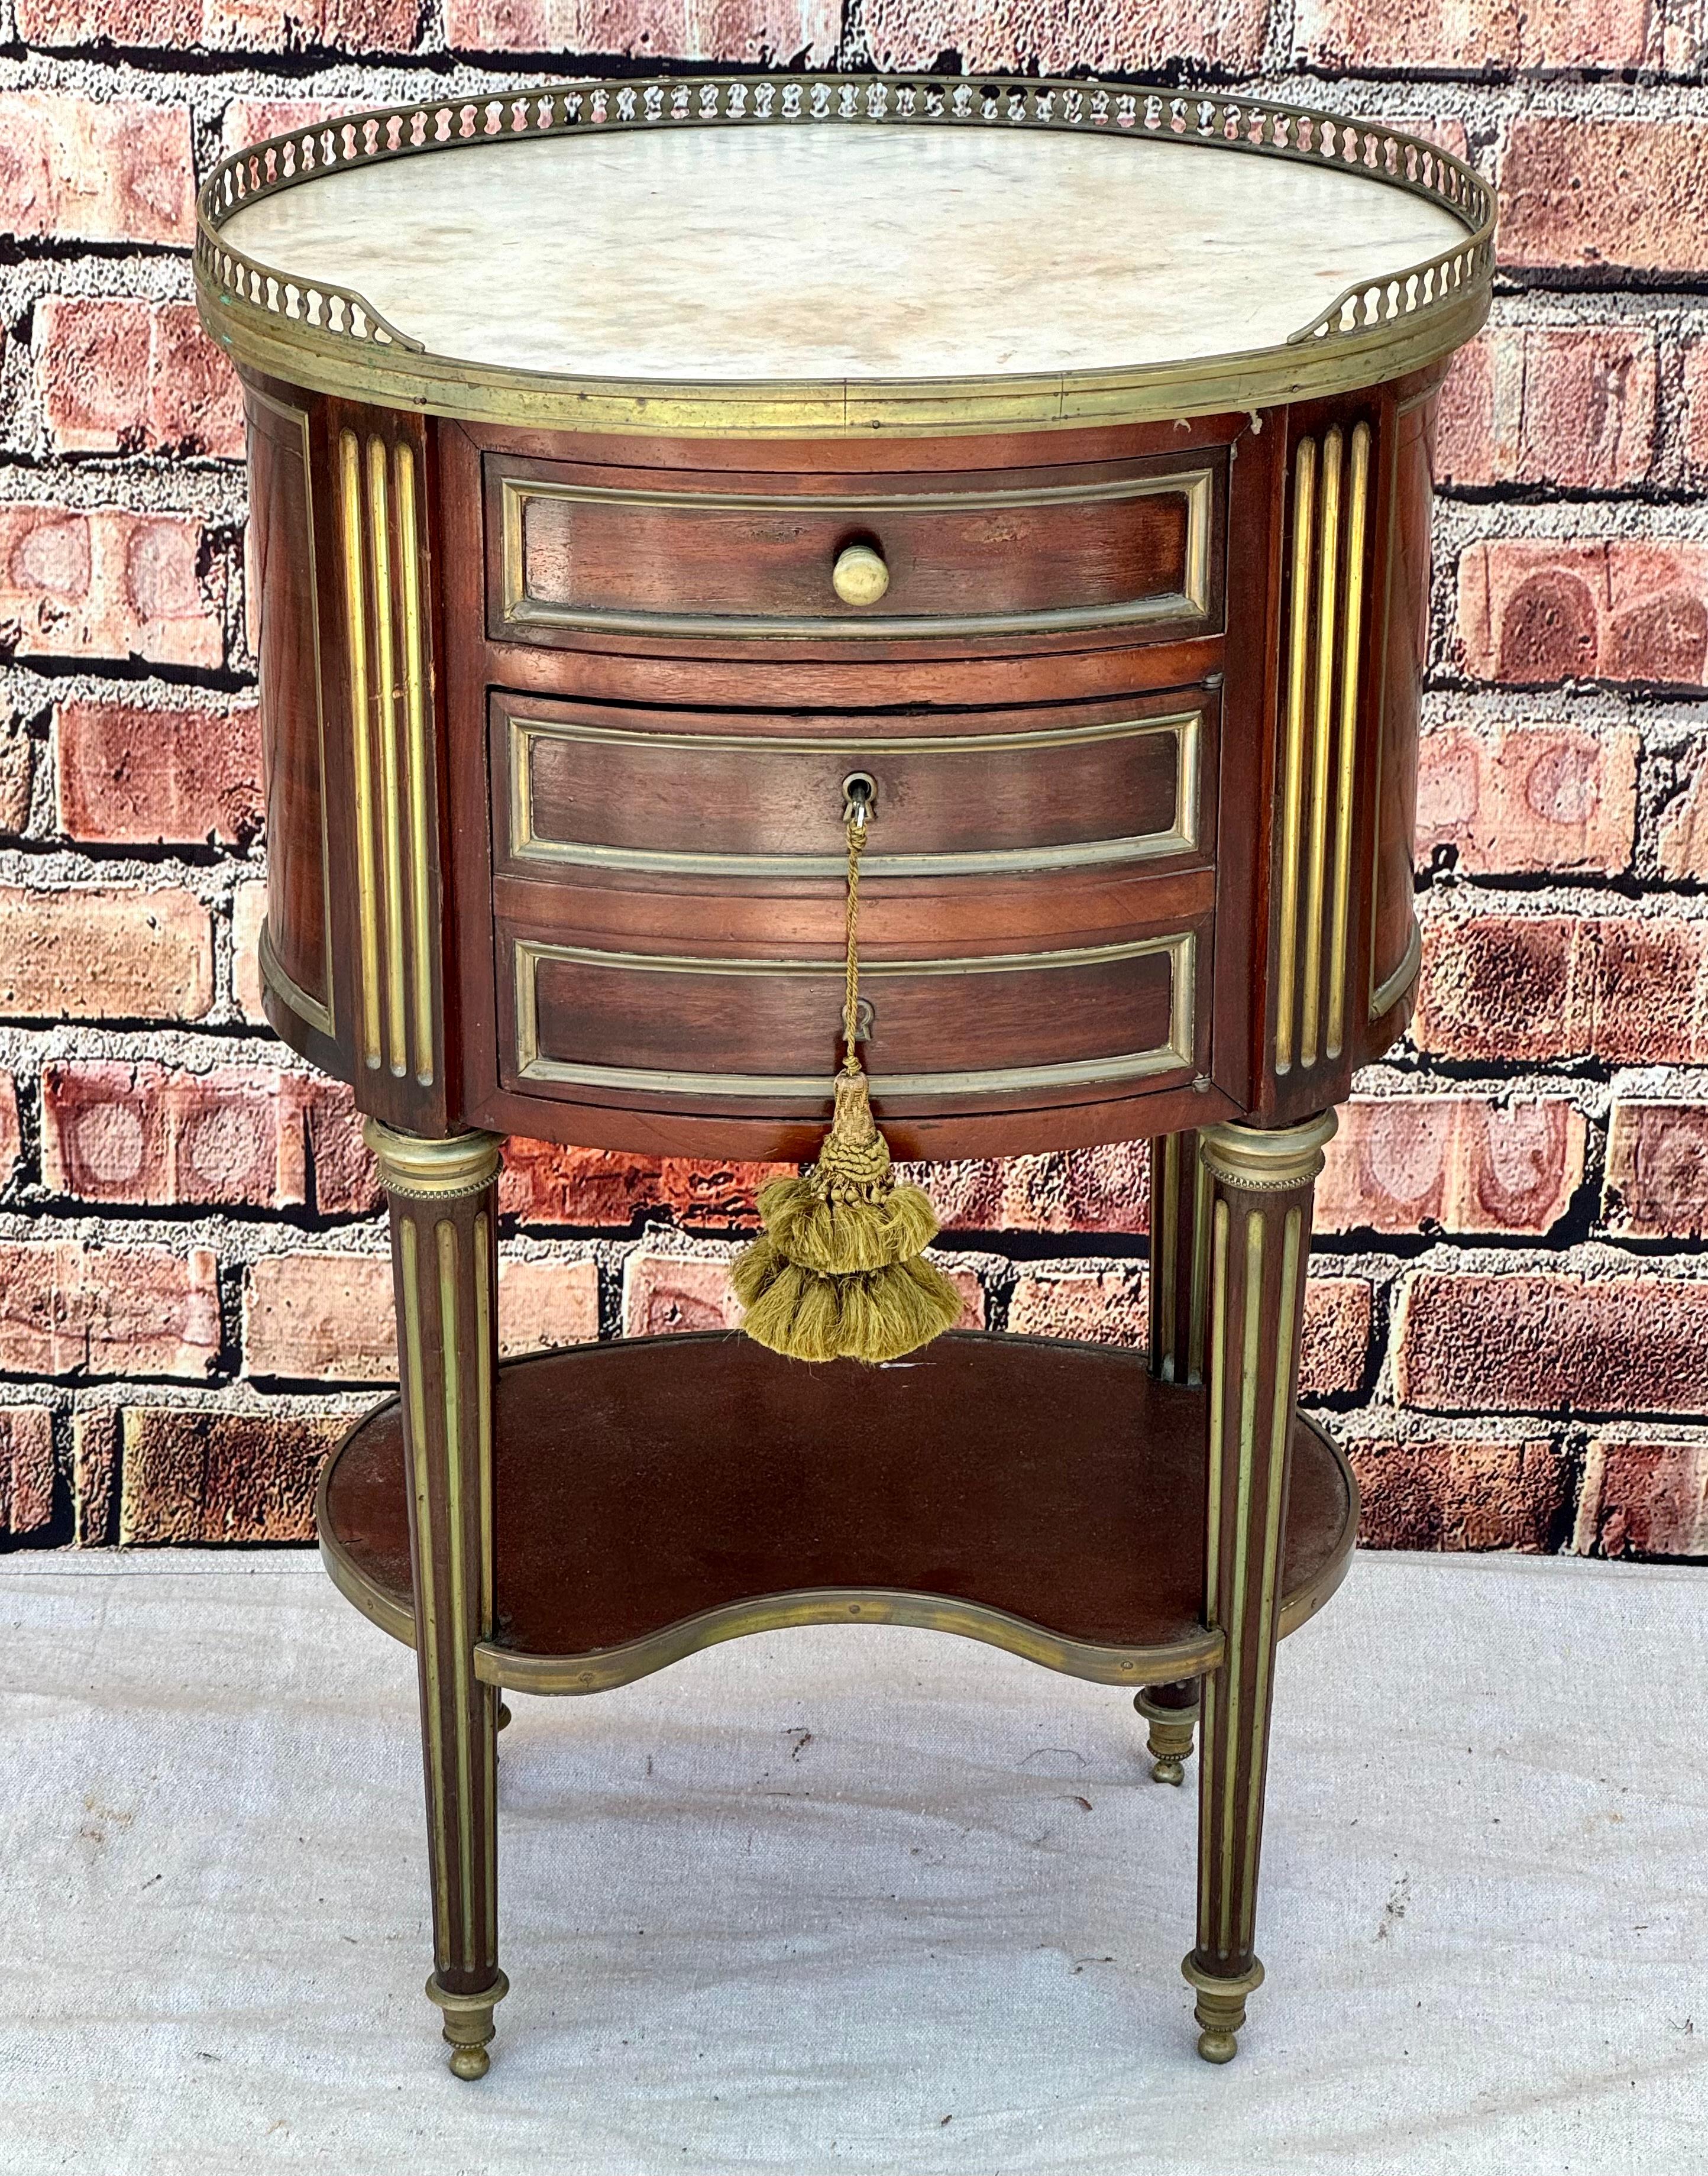 French 19th Century Napoleon III Oval Marble Top Side Table. Table has an oval form with a three quarter brass gallery surround over a white marble top, over a short drawer and a faux drawer facade' door. All sits on corseted and fluted legs joined